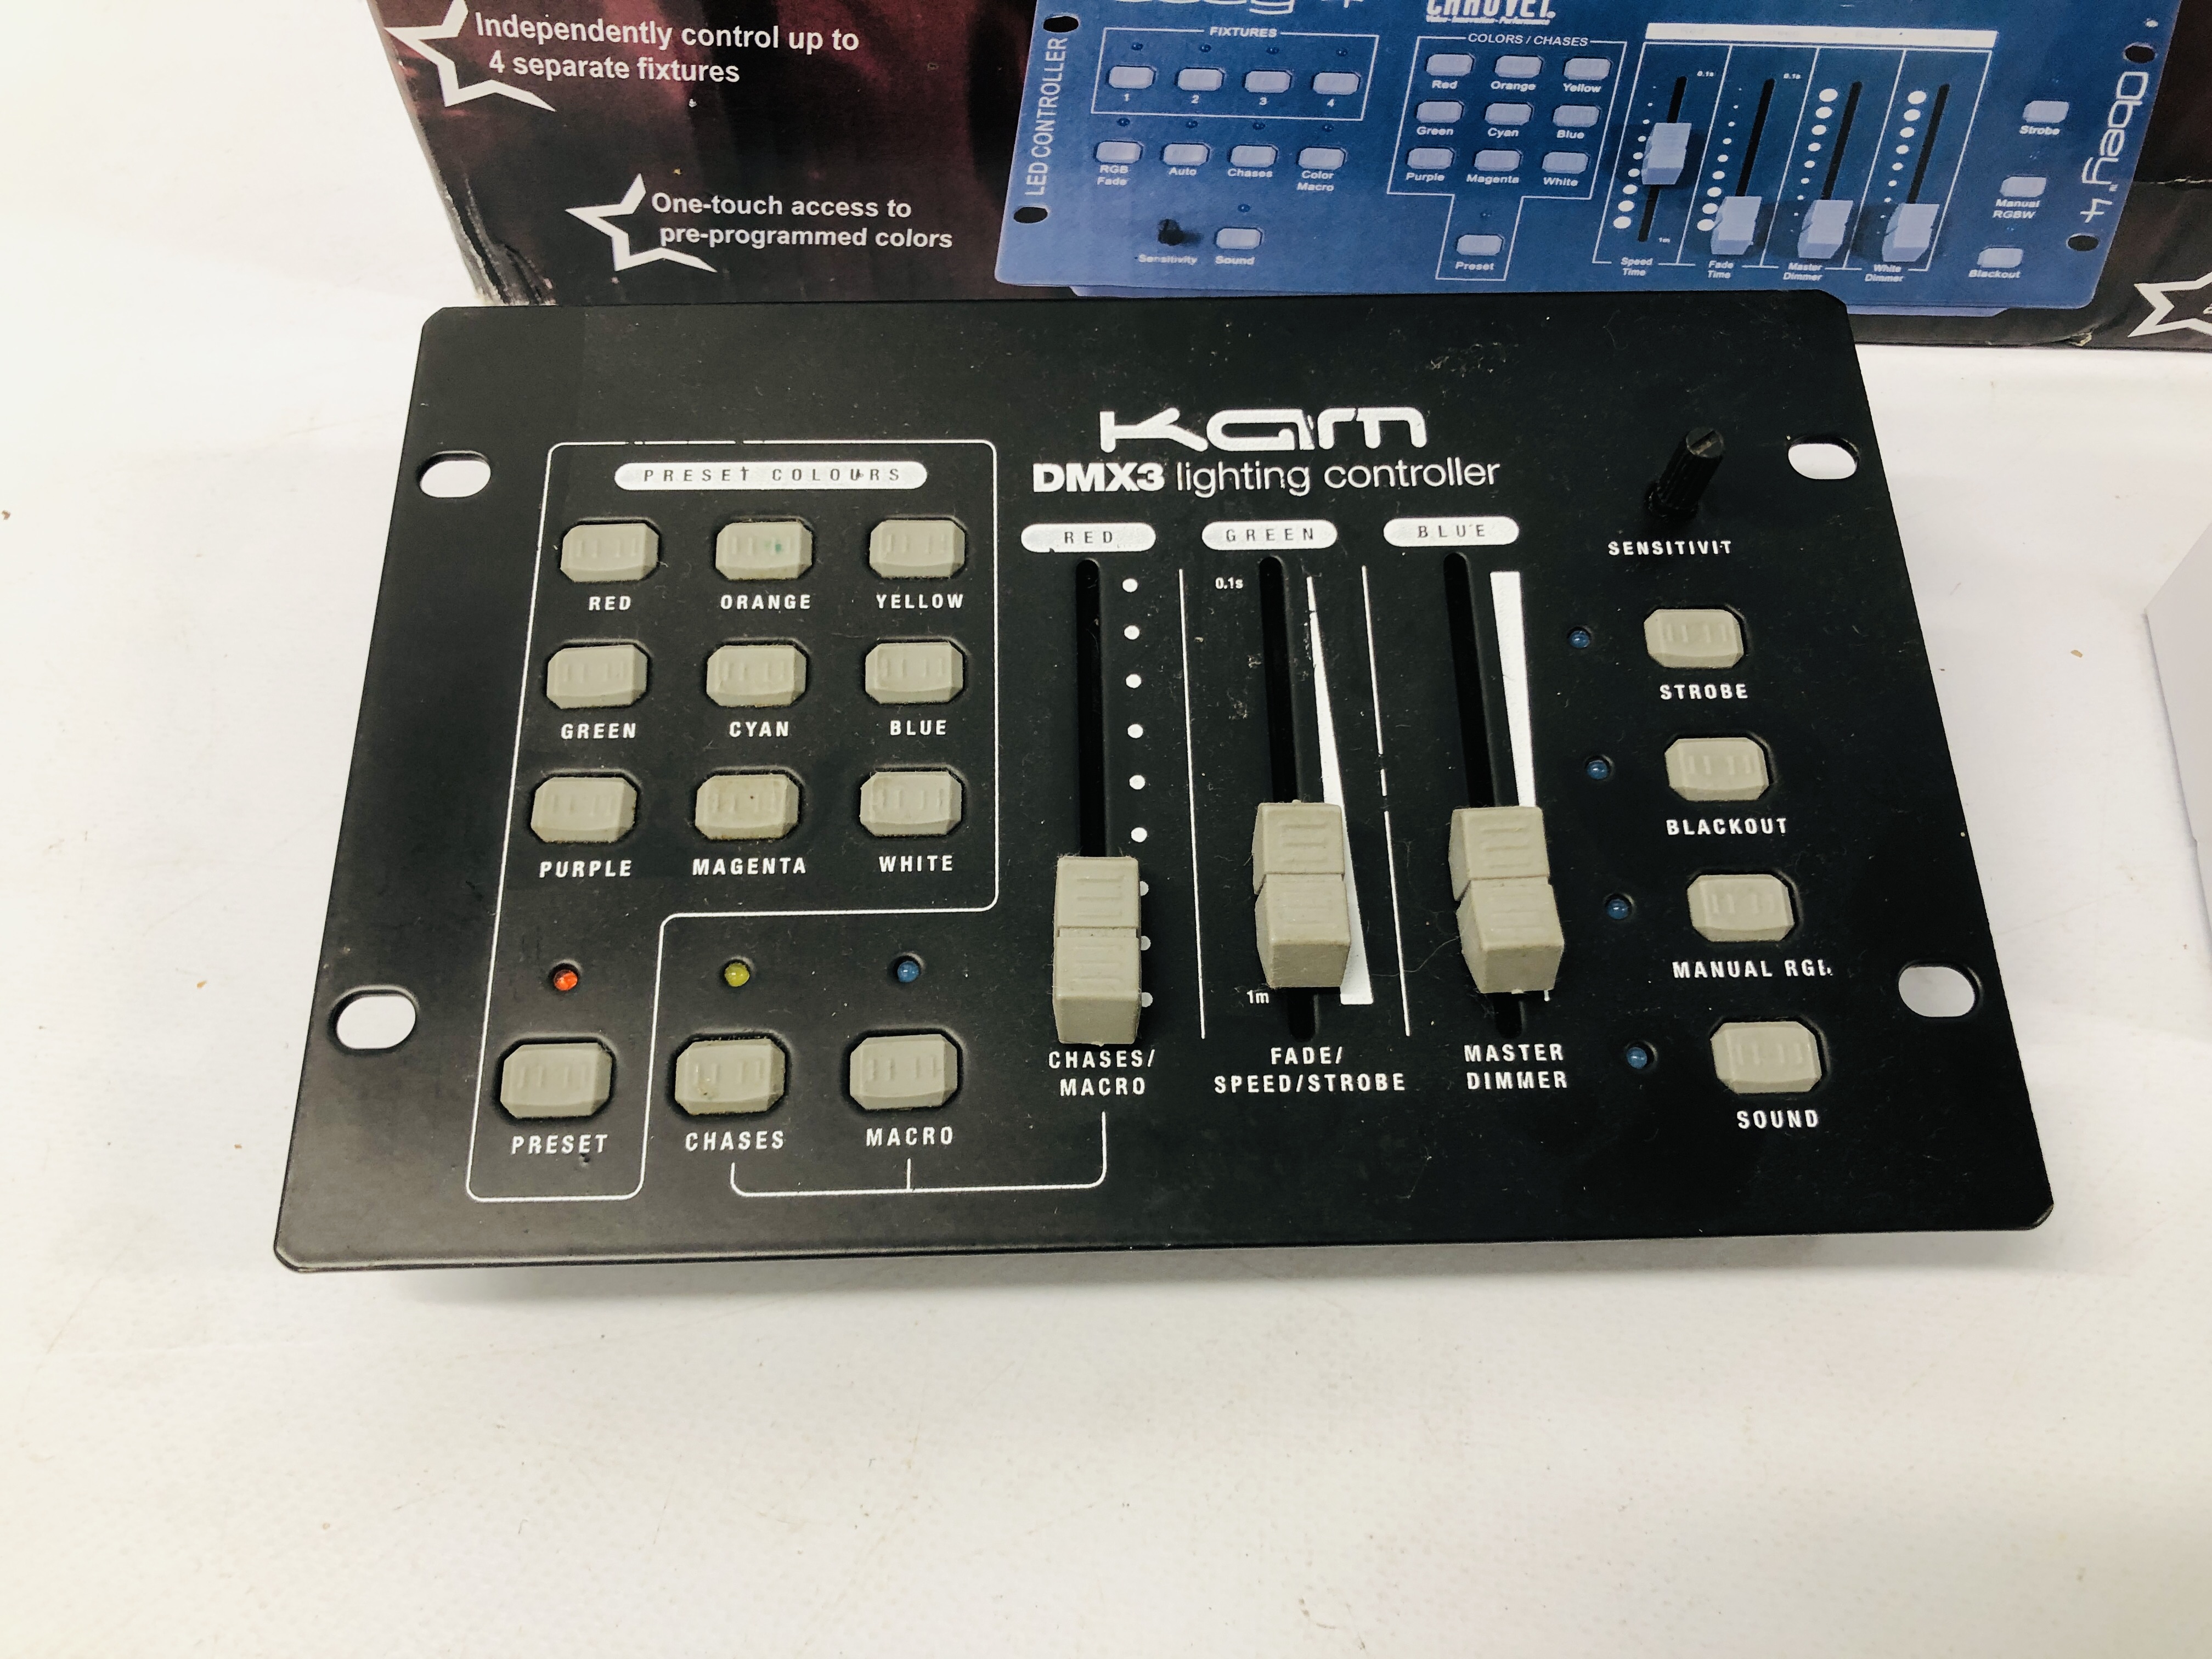 A KAM DMX3 LIGHTING CONTROLLER ALONG WITH A CHAUVET OBEY4 LIGHTING CONTROLLER - SOLD AS SEEN - Image 2 of 6